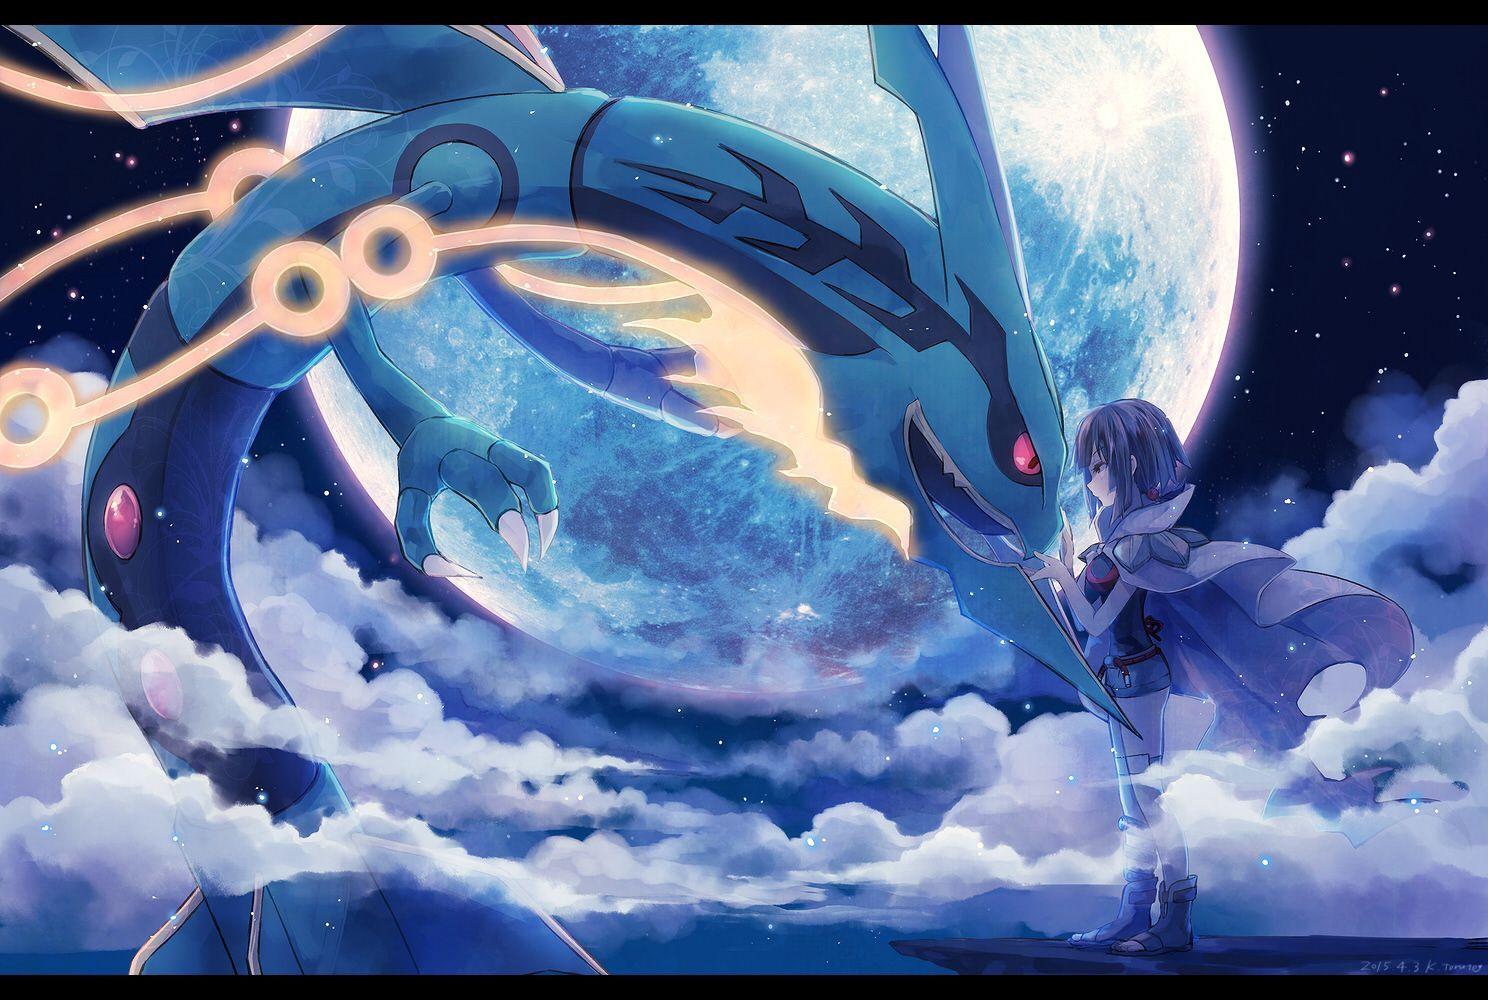 View, download, comment, and rate this 1488x1000 Pokémon Omega Ruby